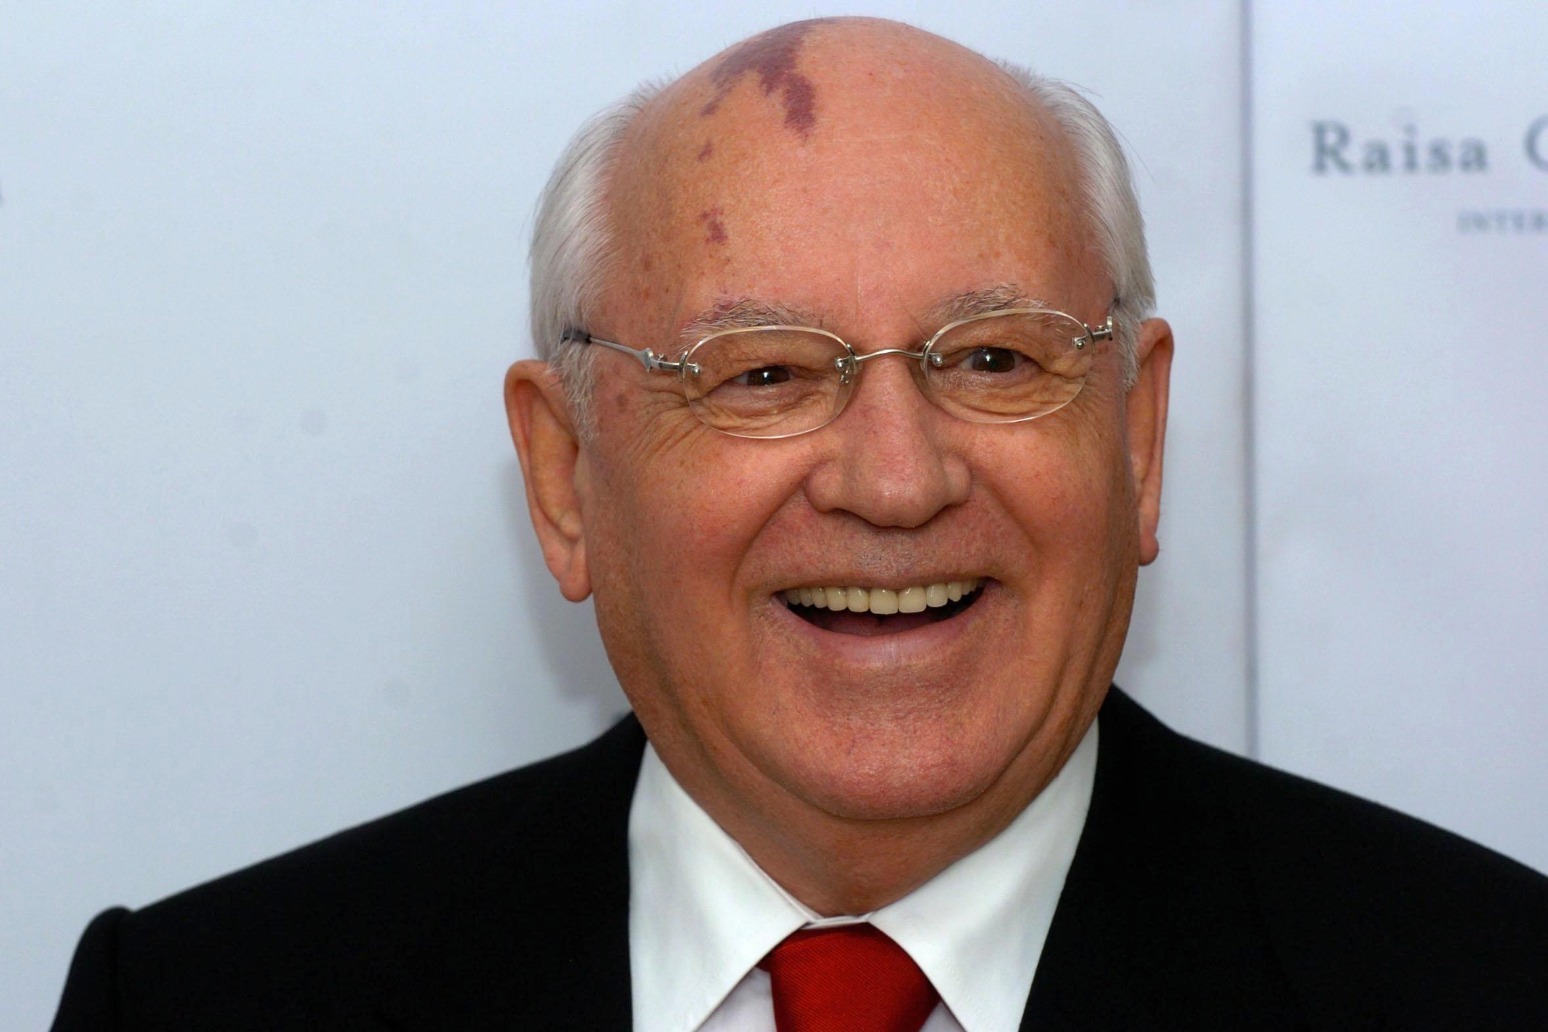 Thousands queue to pay tribute in farewell ceremony for Mikhail Gorbachev 